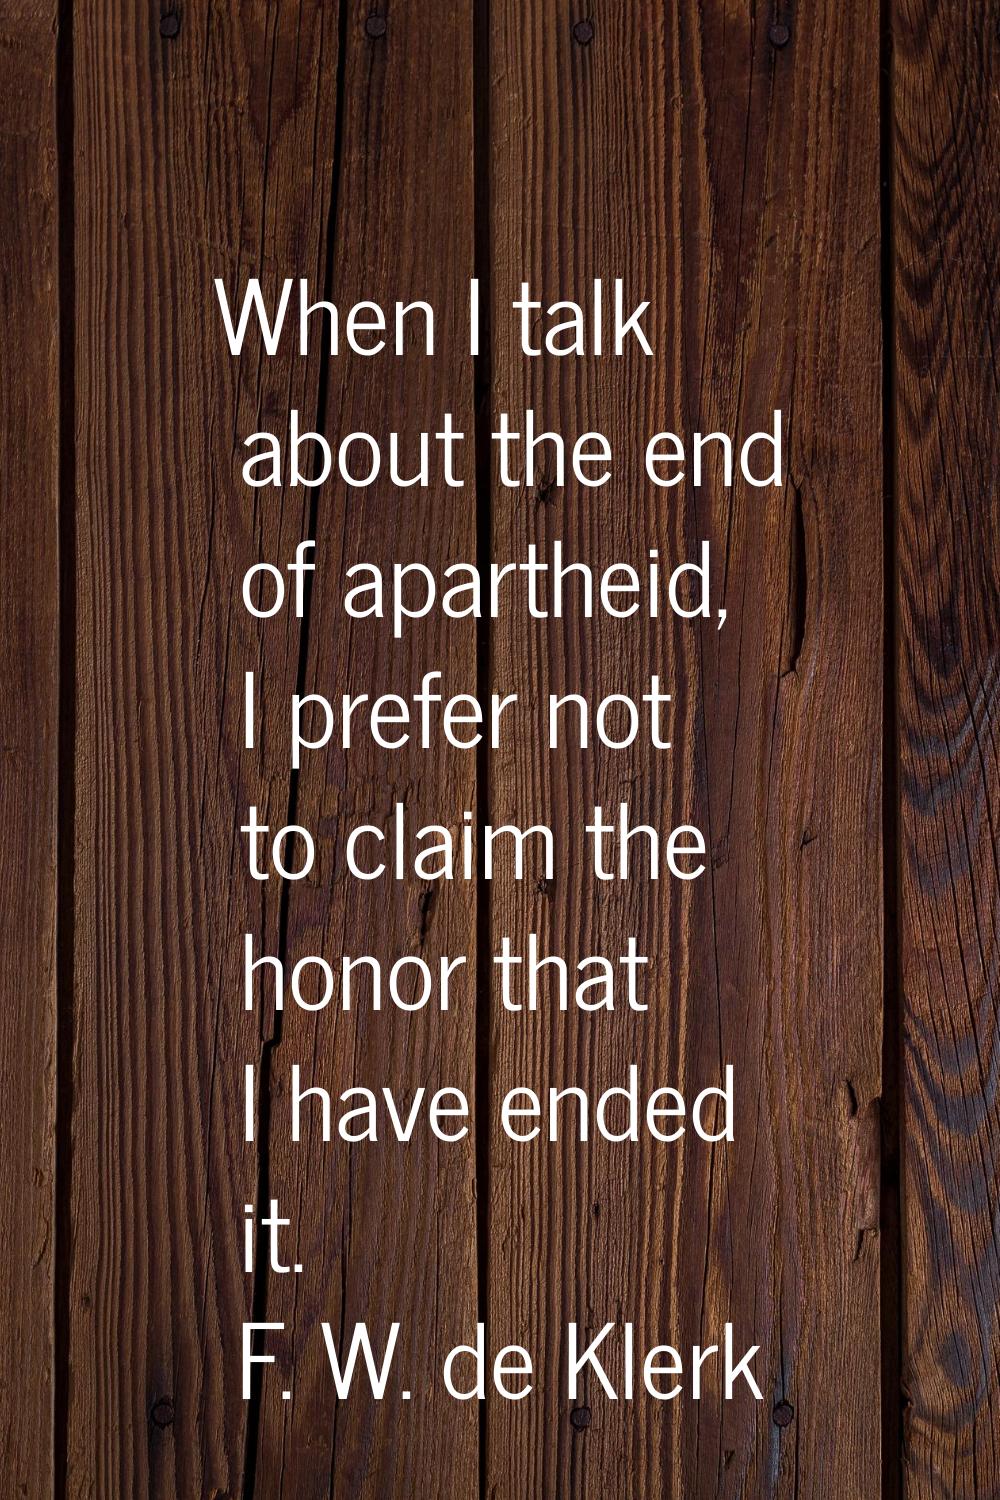 When I talk about the end of apartheid, I prefer not to claim the honor that I have ended it.